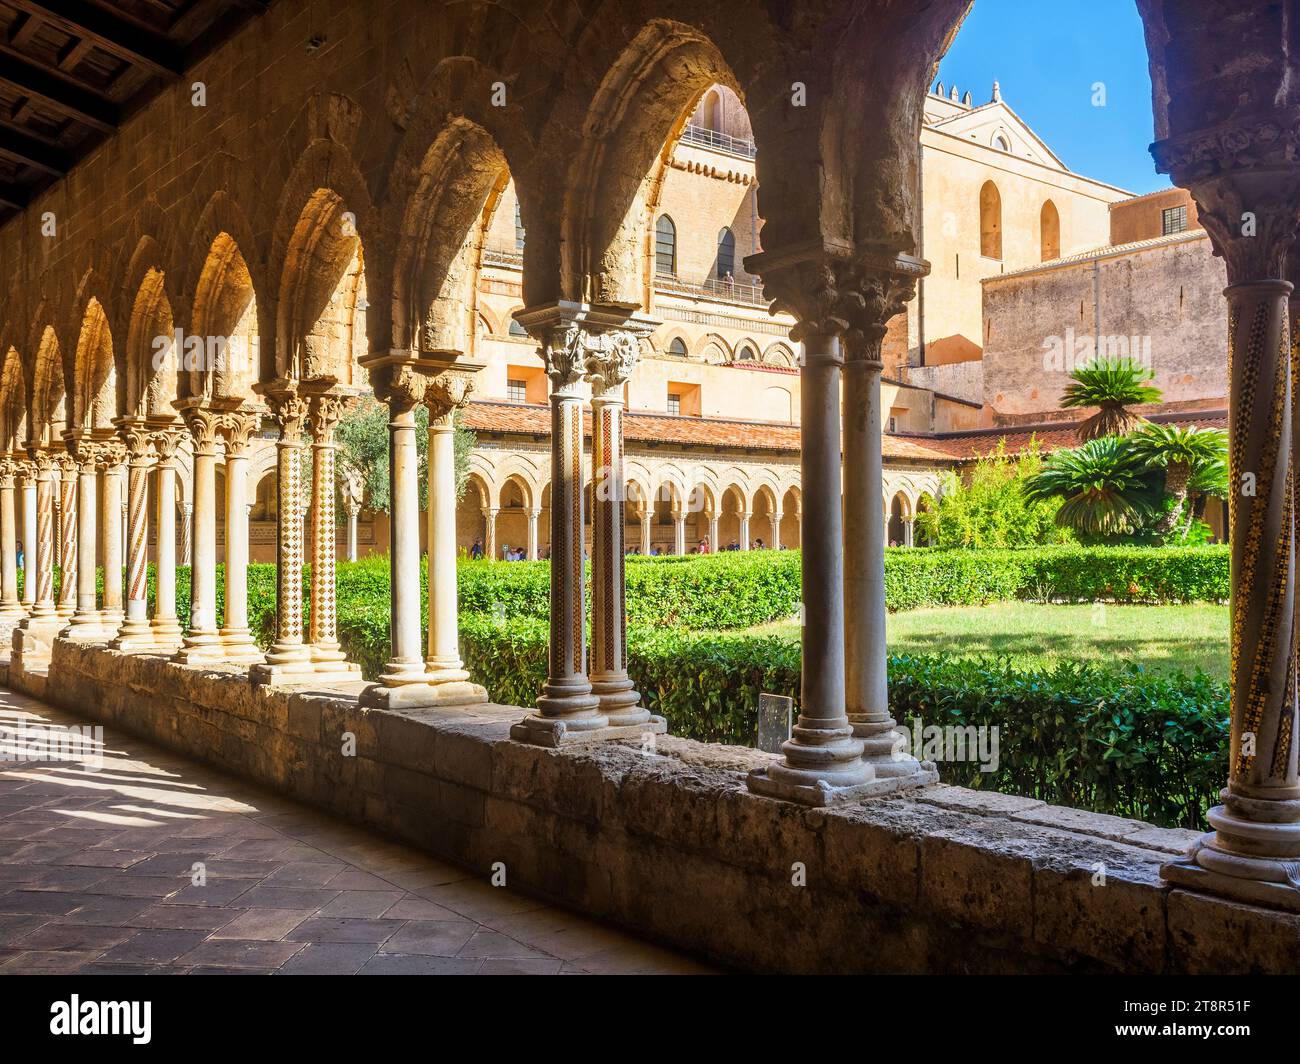 Monreale Cathedral Cloister and gardens in Monreale, Palermo - Sicily, Italy Stock Photo